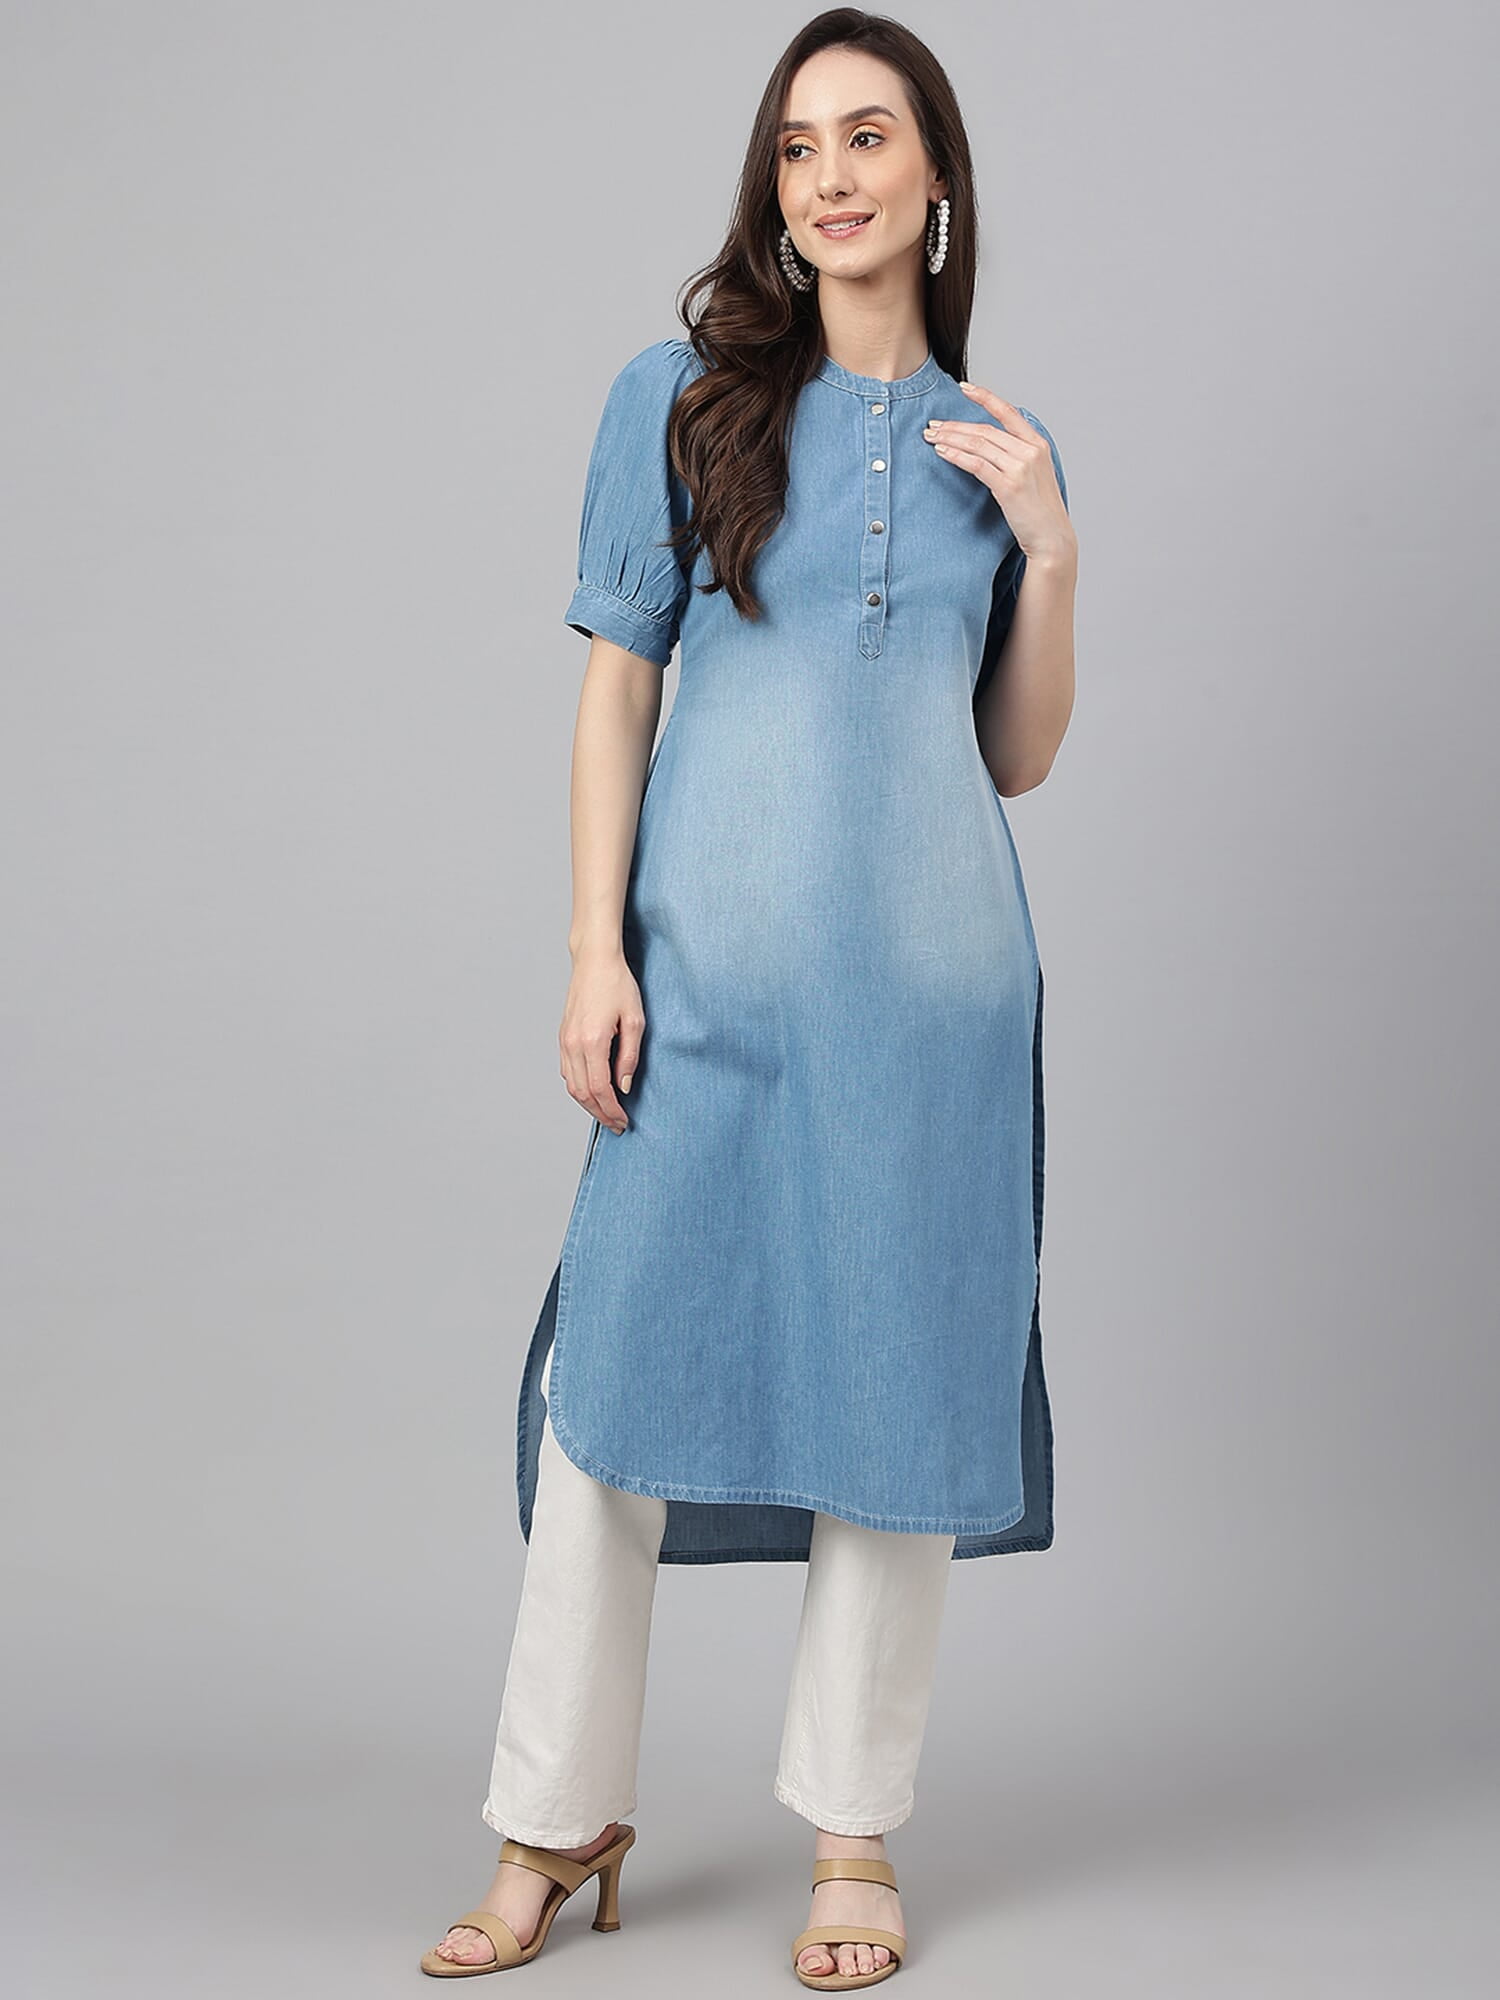 Buy HI-FASHION Embroidered Heavy Denim Kurti for Women Casual 1 at Amazon.in